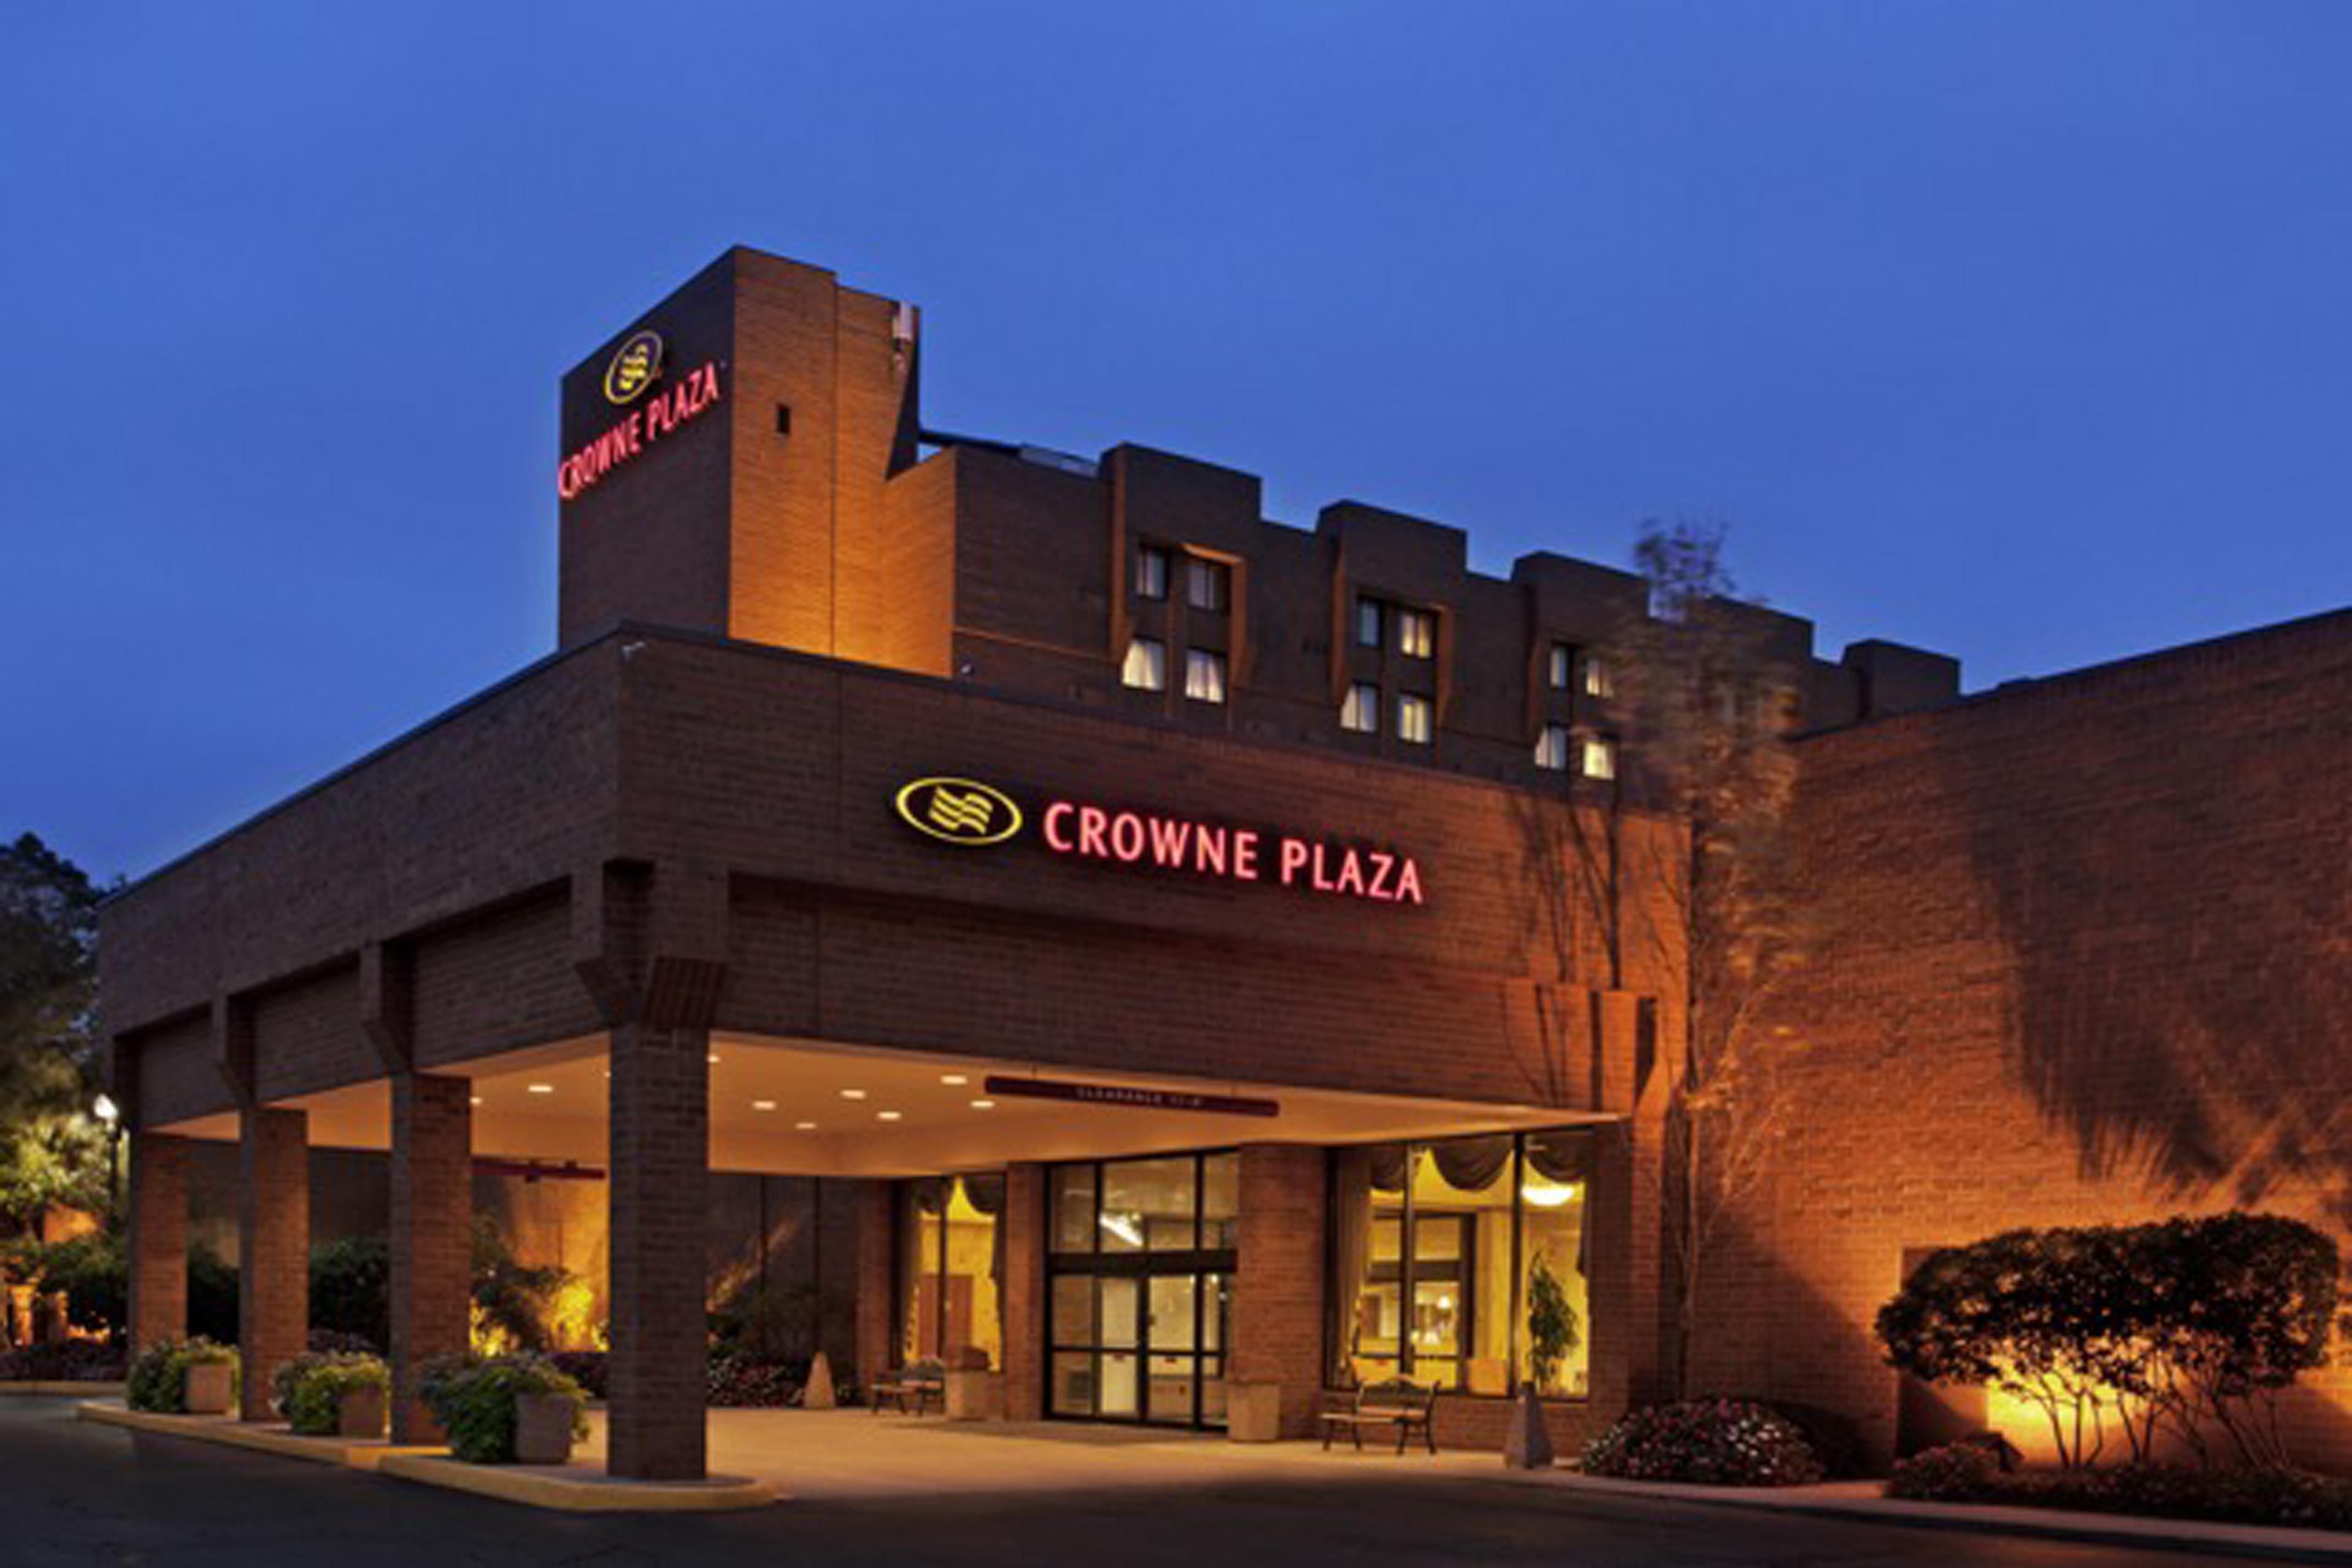 Welcome to the Crowne Plaza Columbus North-Worthington hotel.